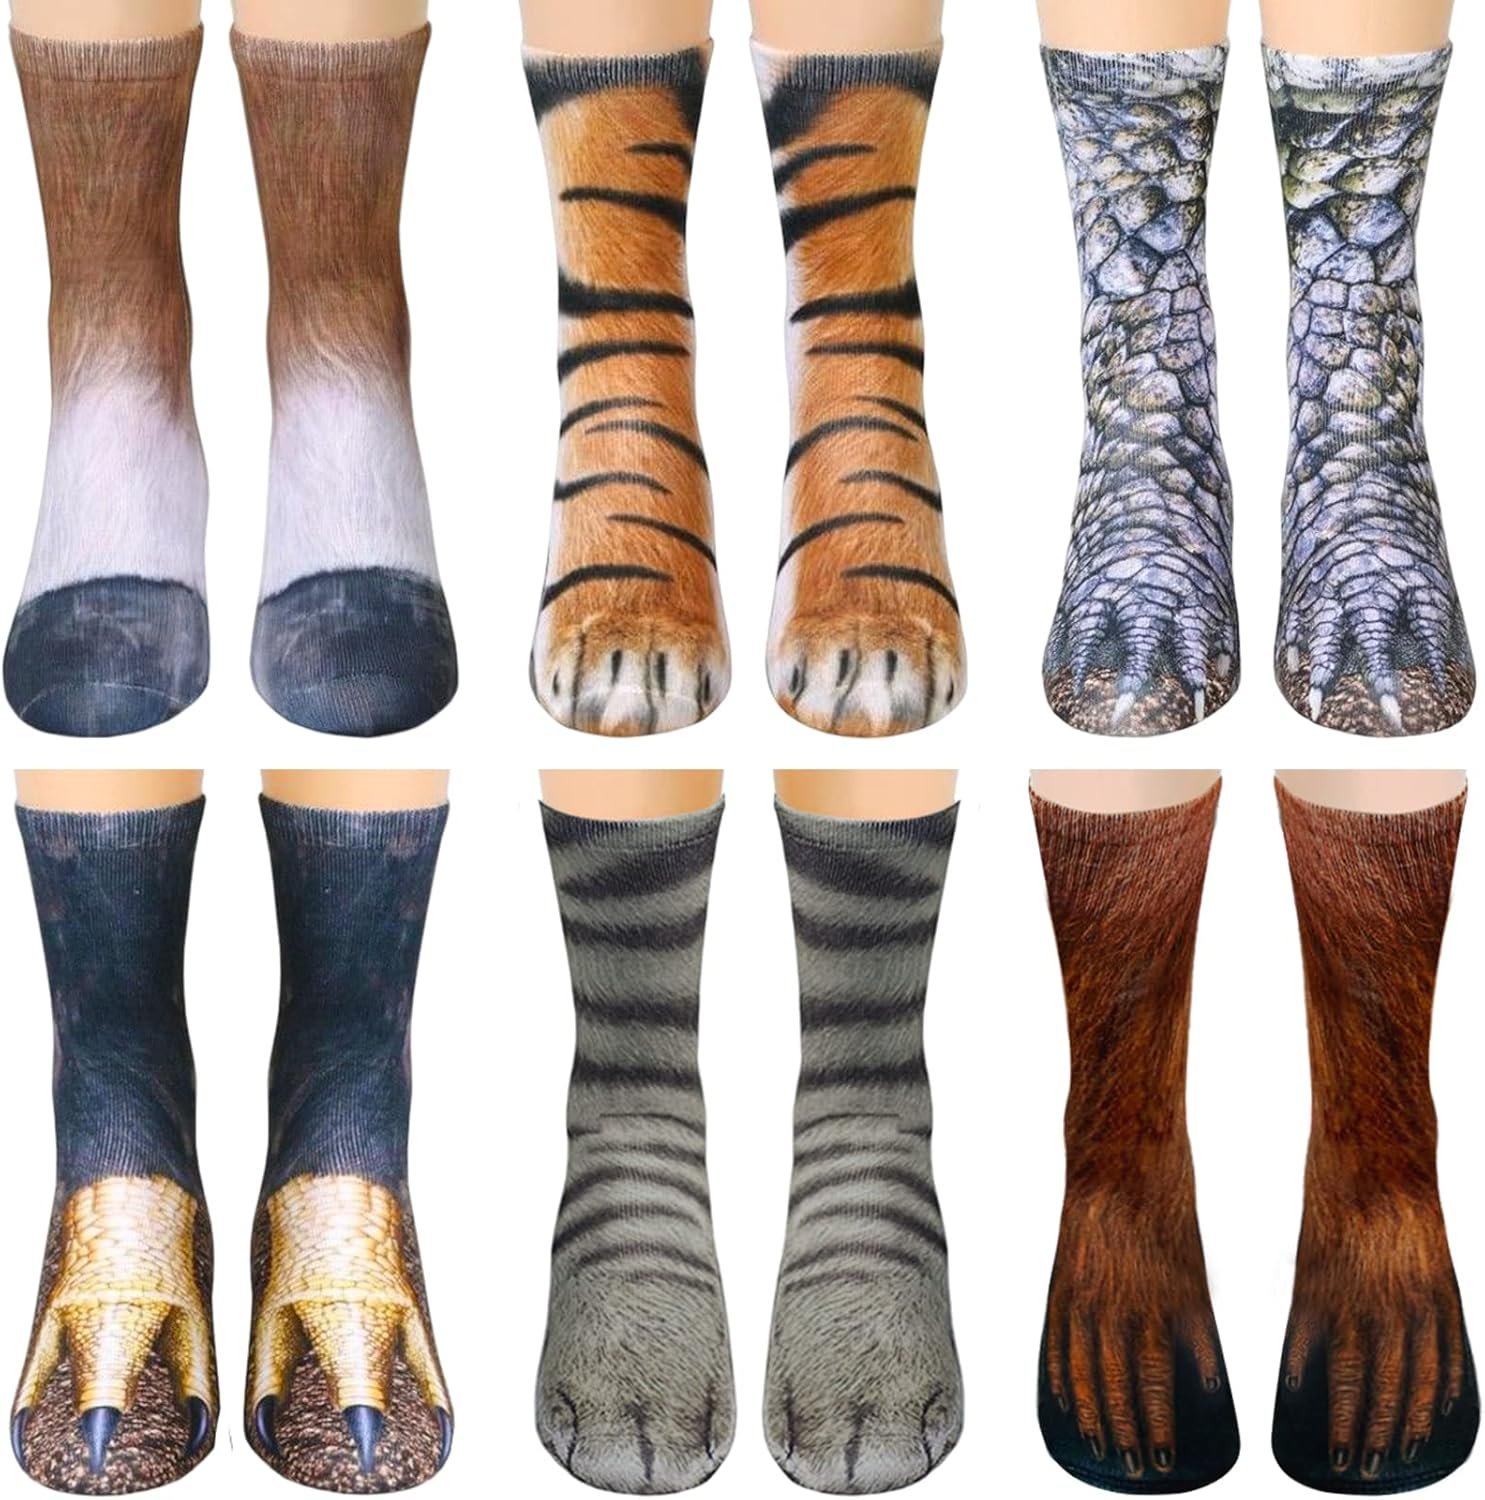 Crazy Cat Claw Socks Review